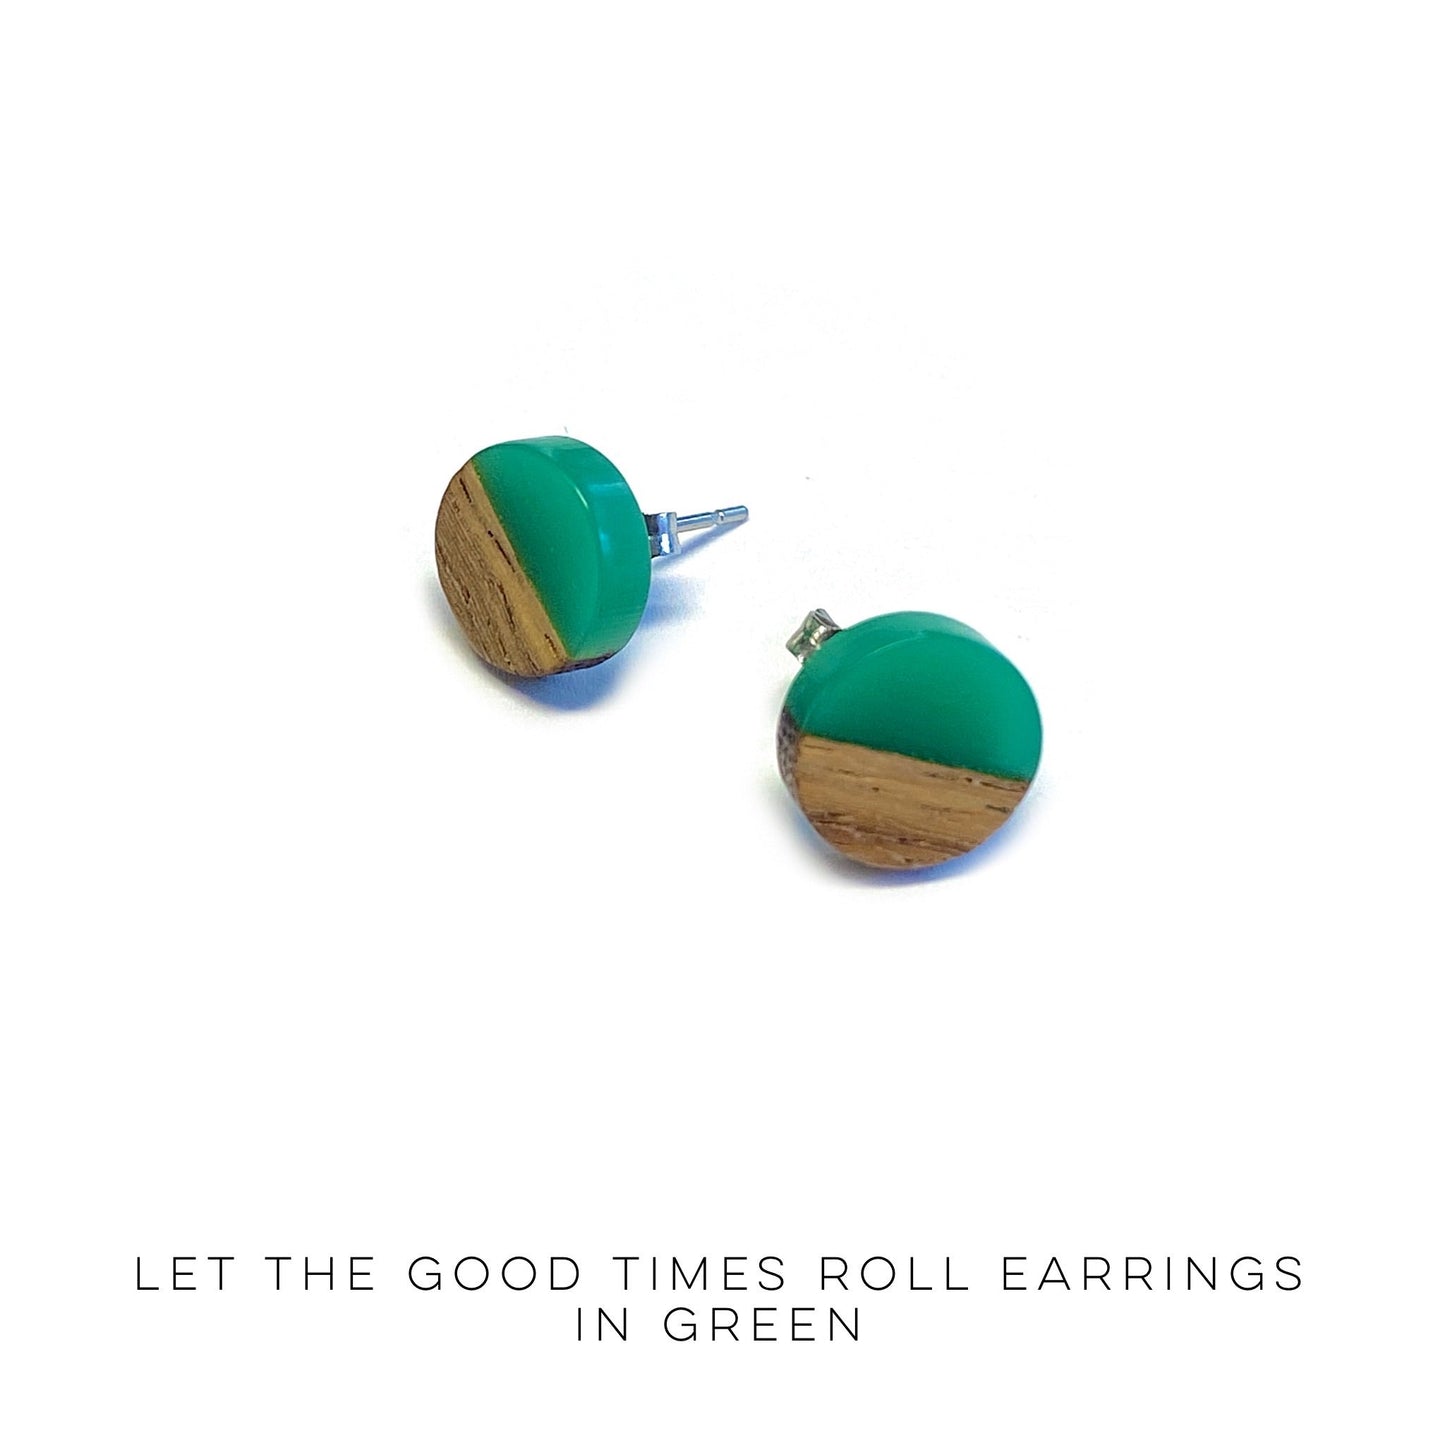 Let The Good Times Roll Earrings in Green